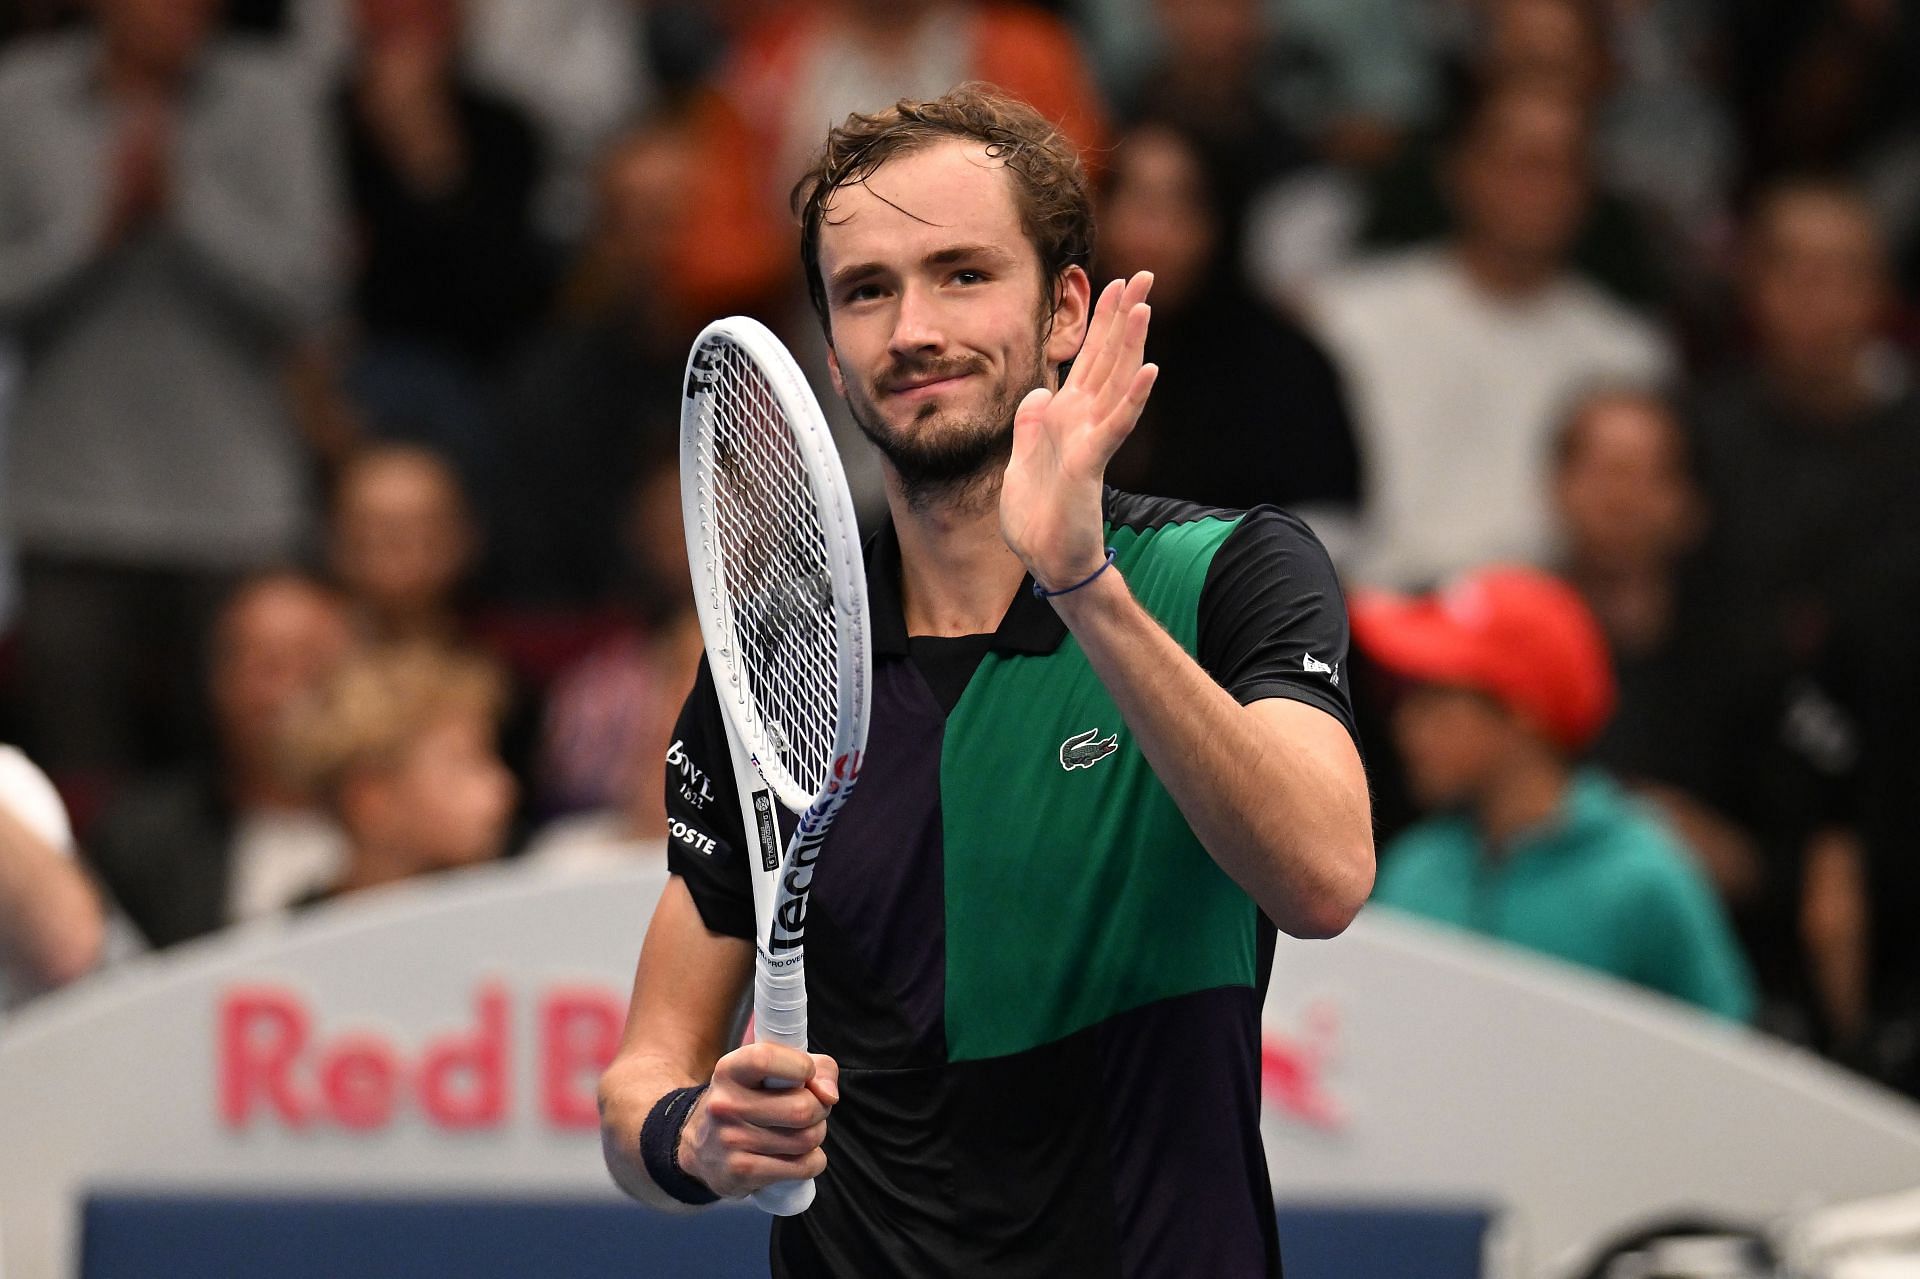 Daniil Medvedev reaches final in first tournament as father at Erste Bank Open